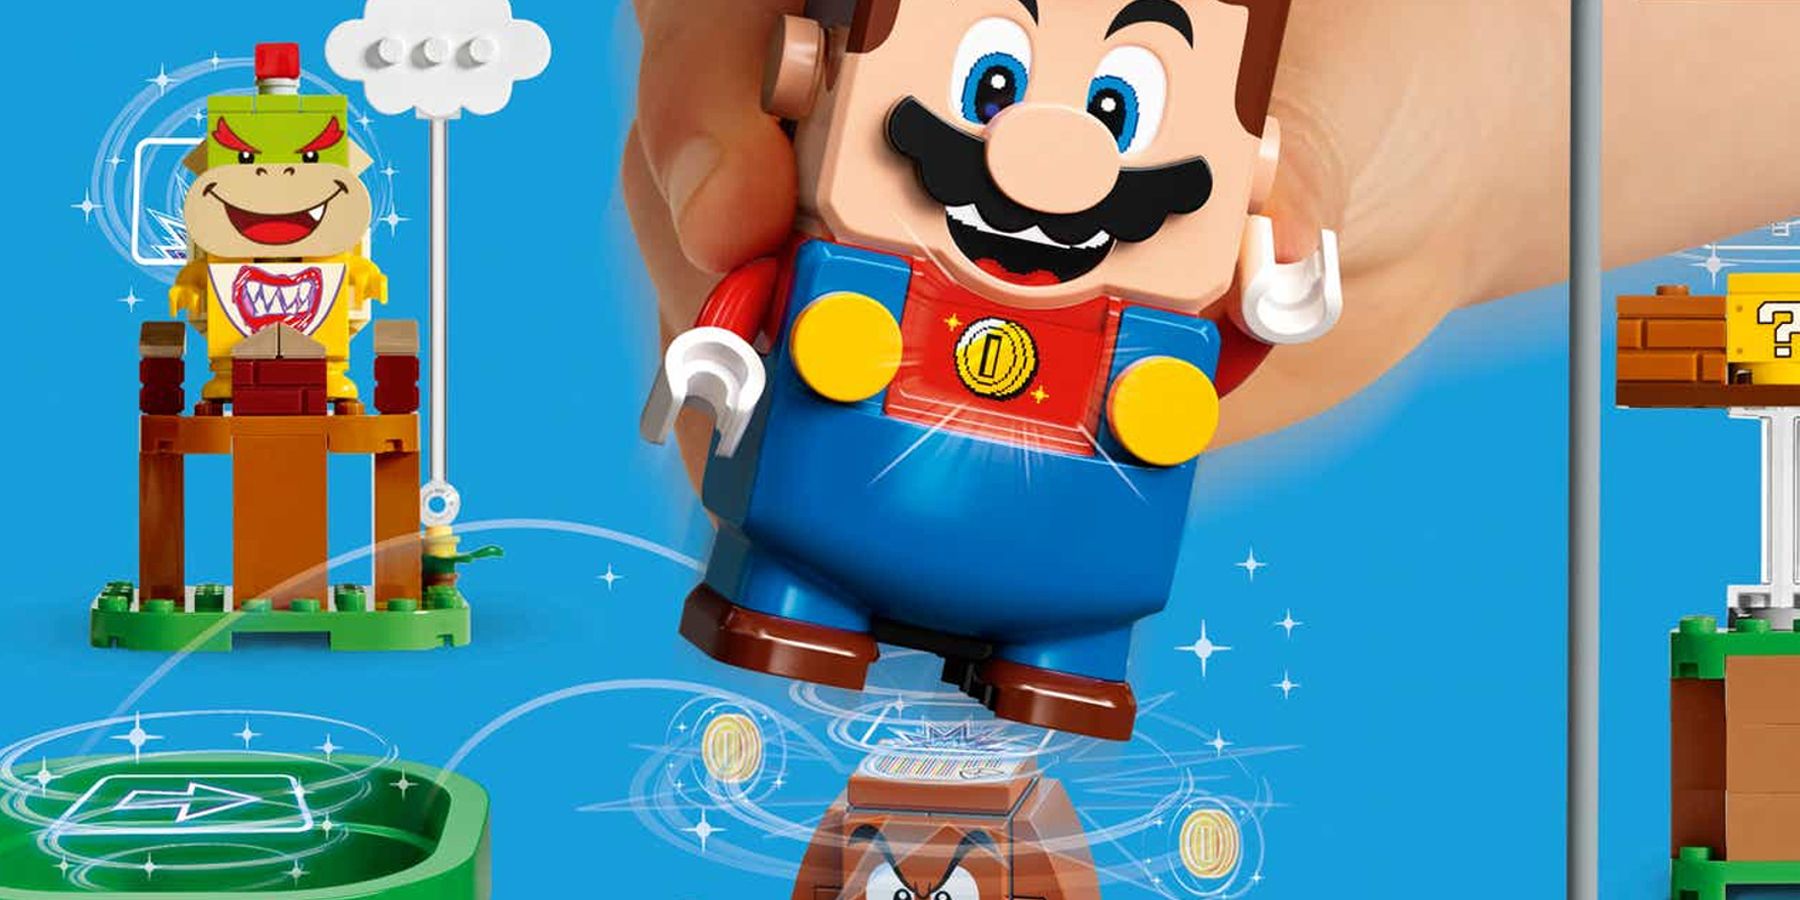 New LEGO Mario Set Revealed with Price and Release Date